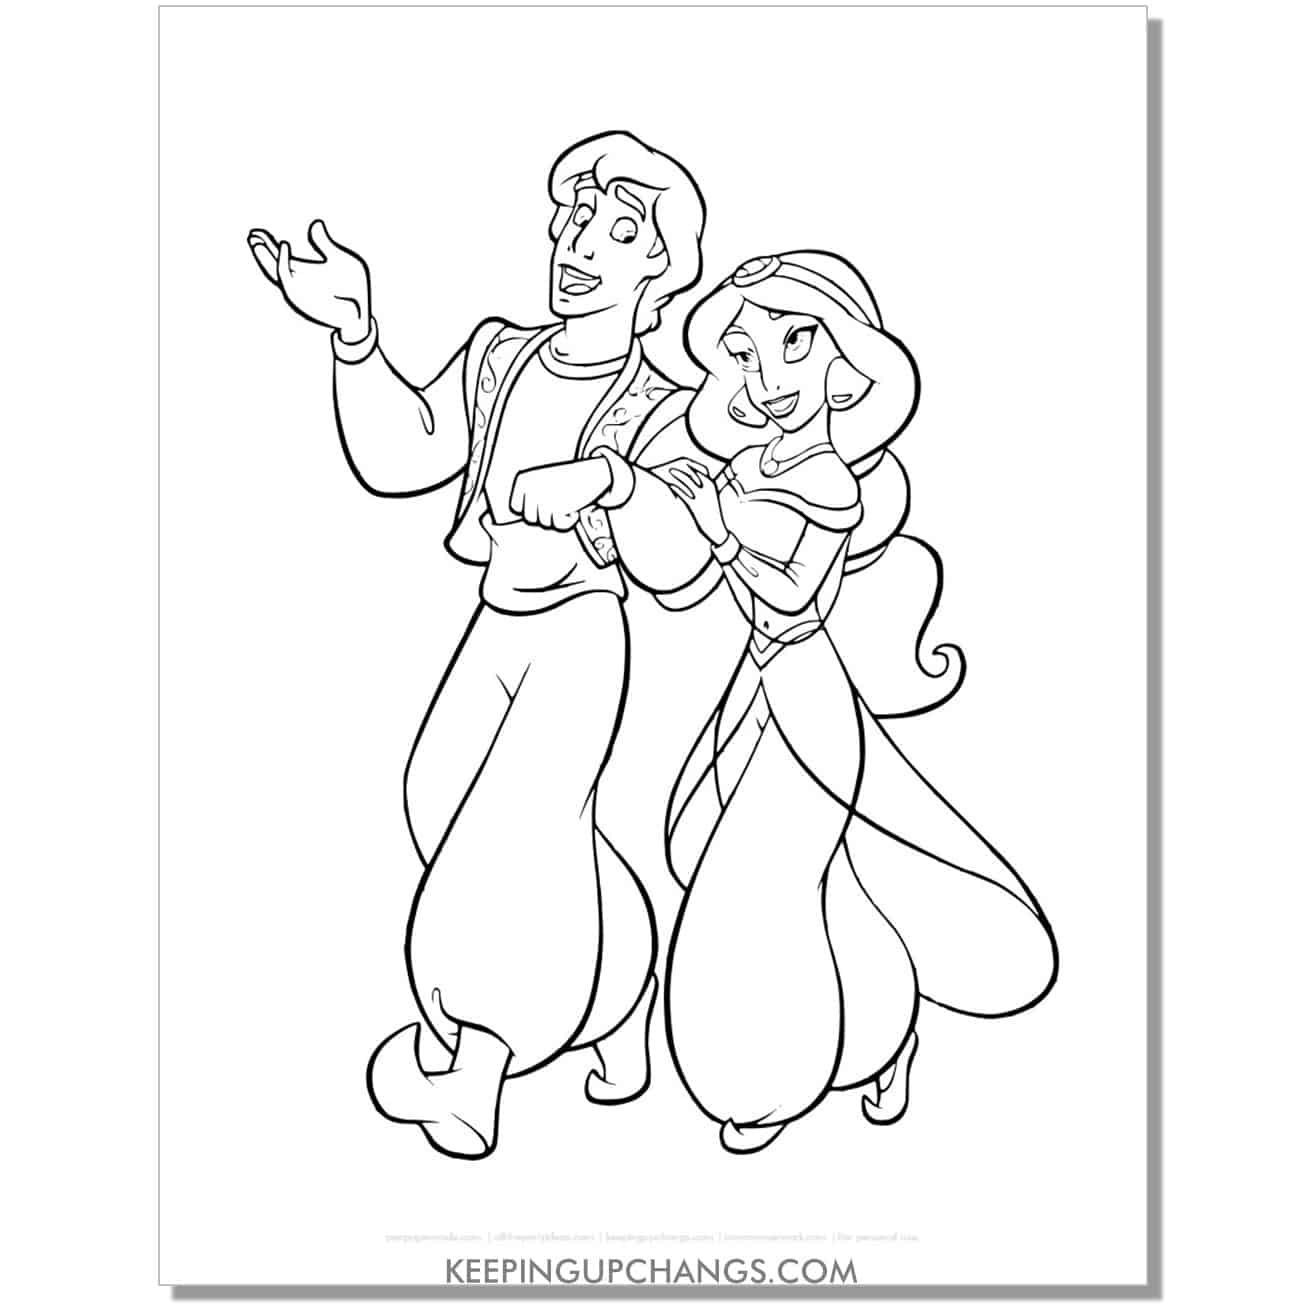 jasmine linking arms with aladdin coloring page, sheet.